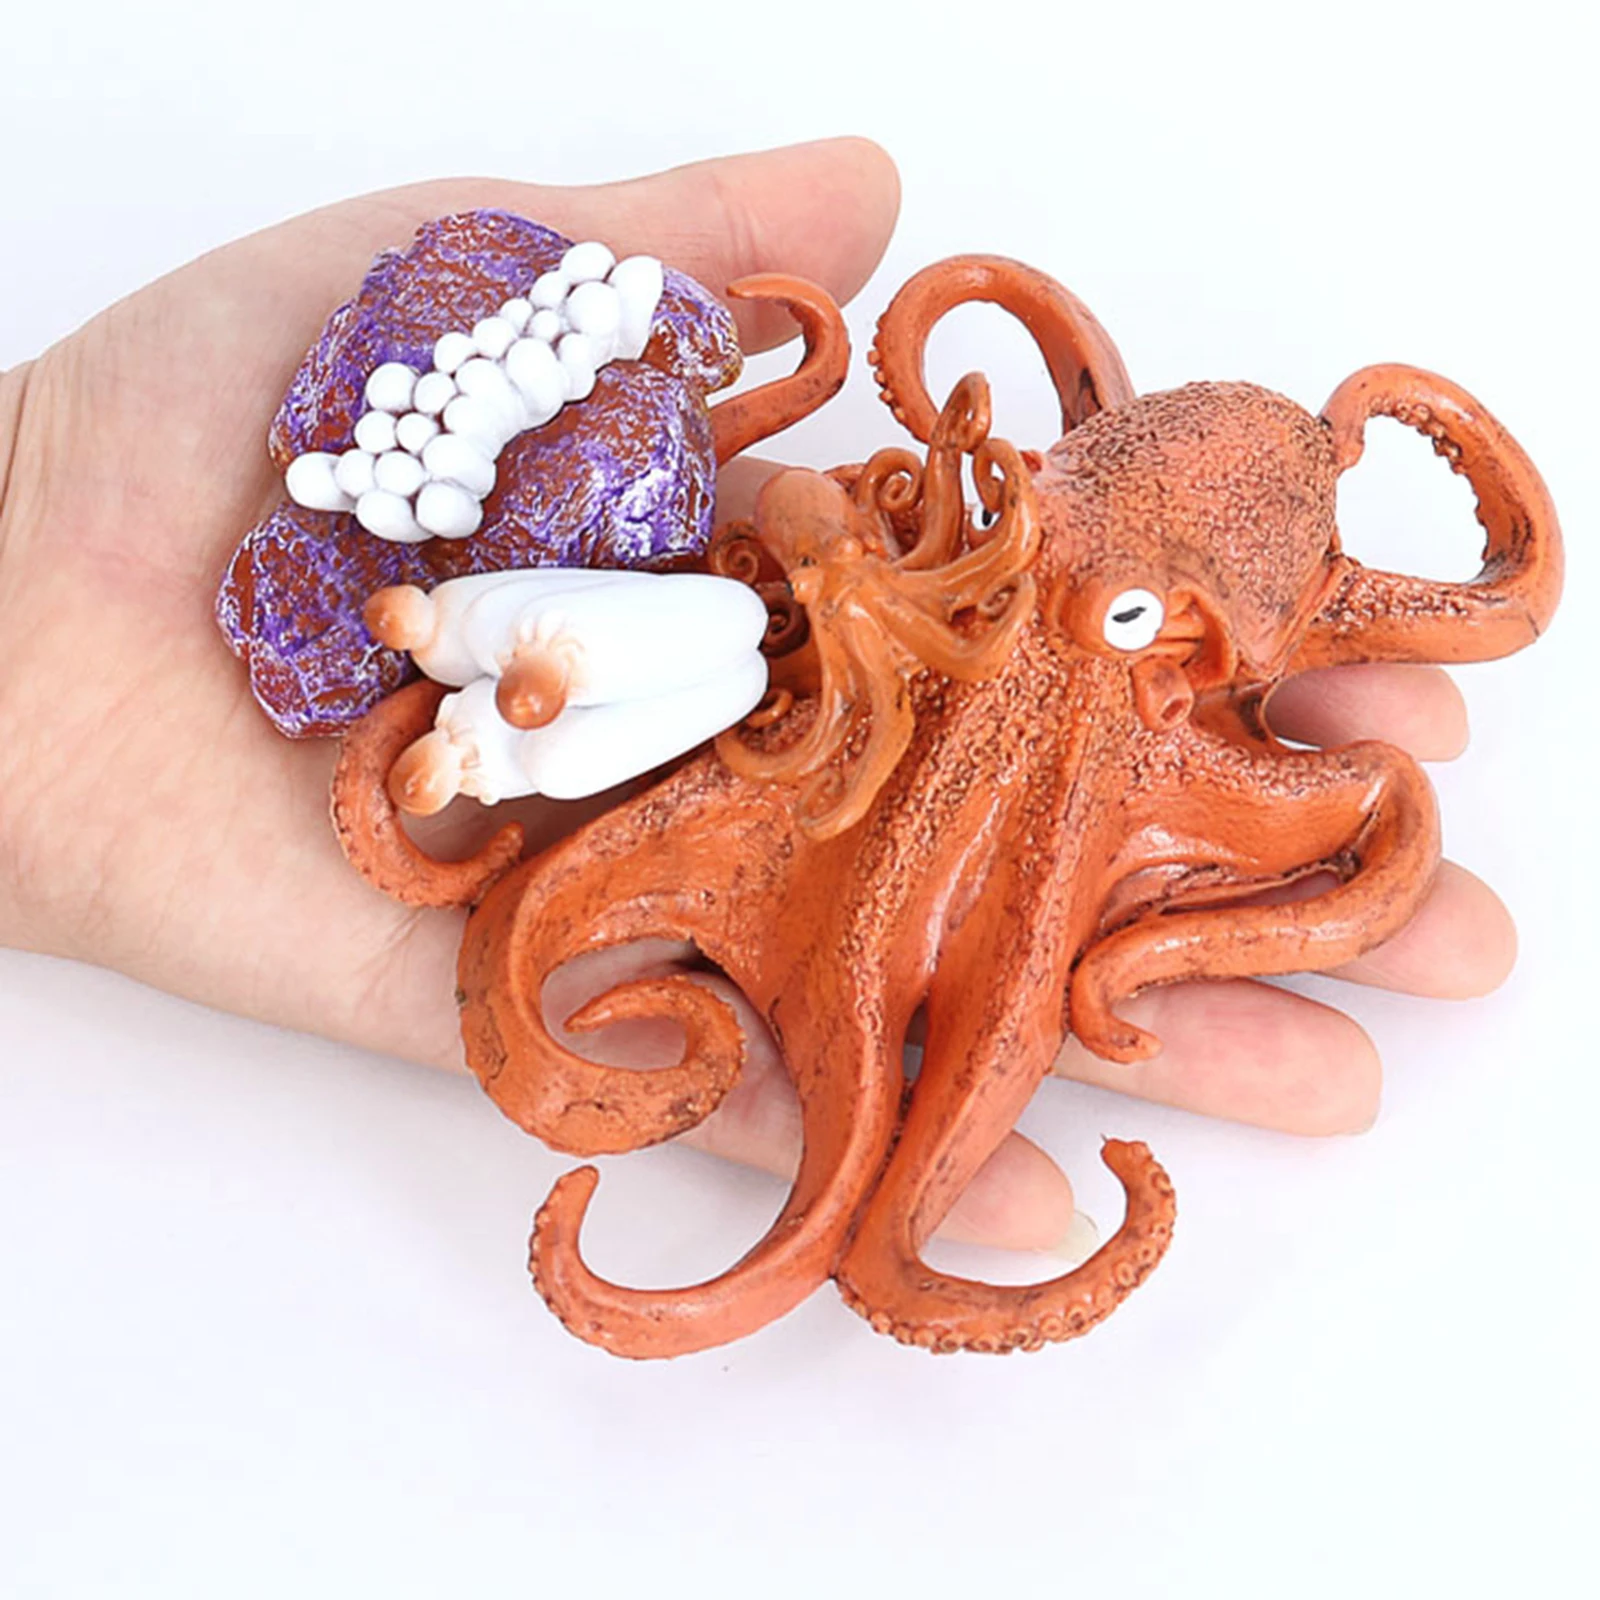 4 Stages Life Cycle of a Octopus, Insects Plastic Octopus Toy Figure - Authentic Hand Painted Model